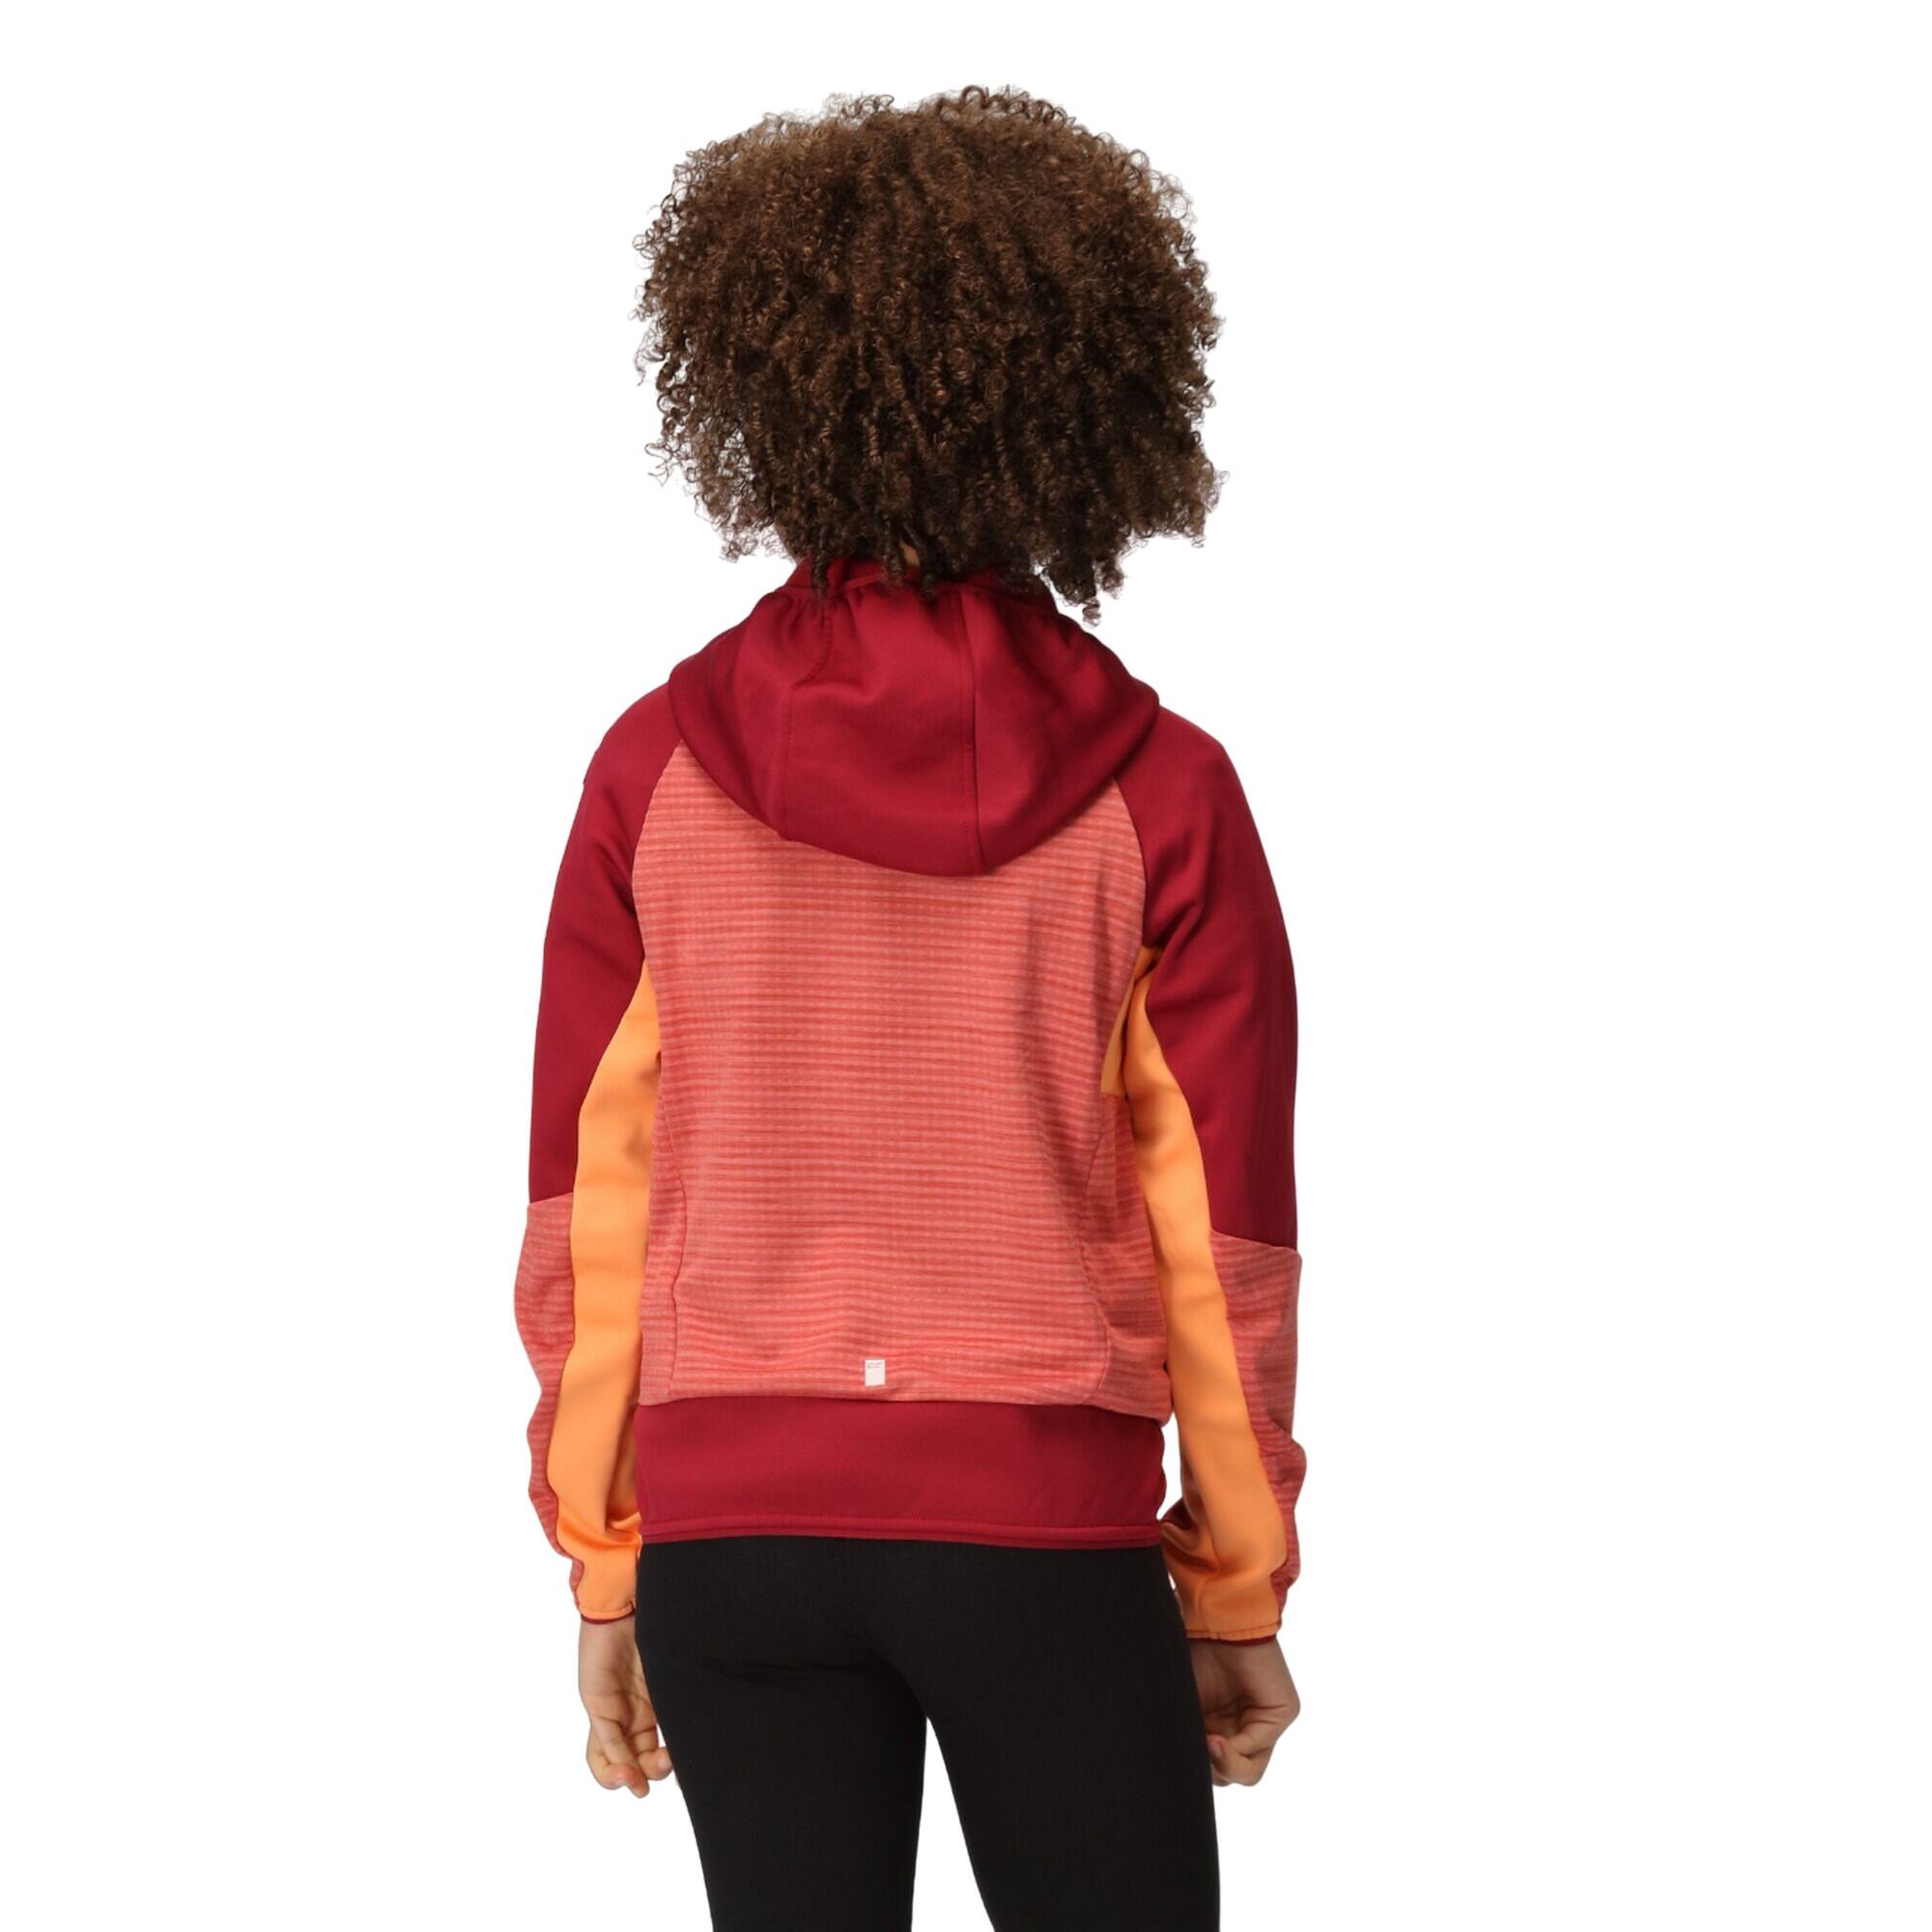 Childrens/Kids Prenton II Hooded Soft Shell Jacket (Mineral Red/Rumba Red) 4/5